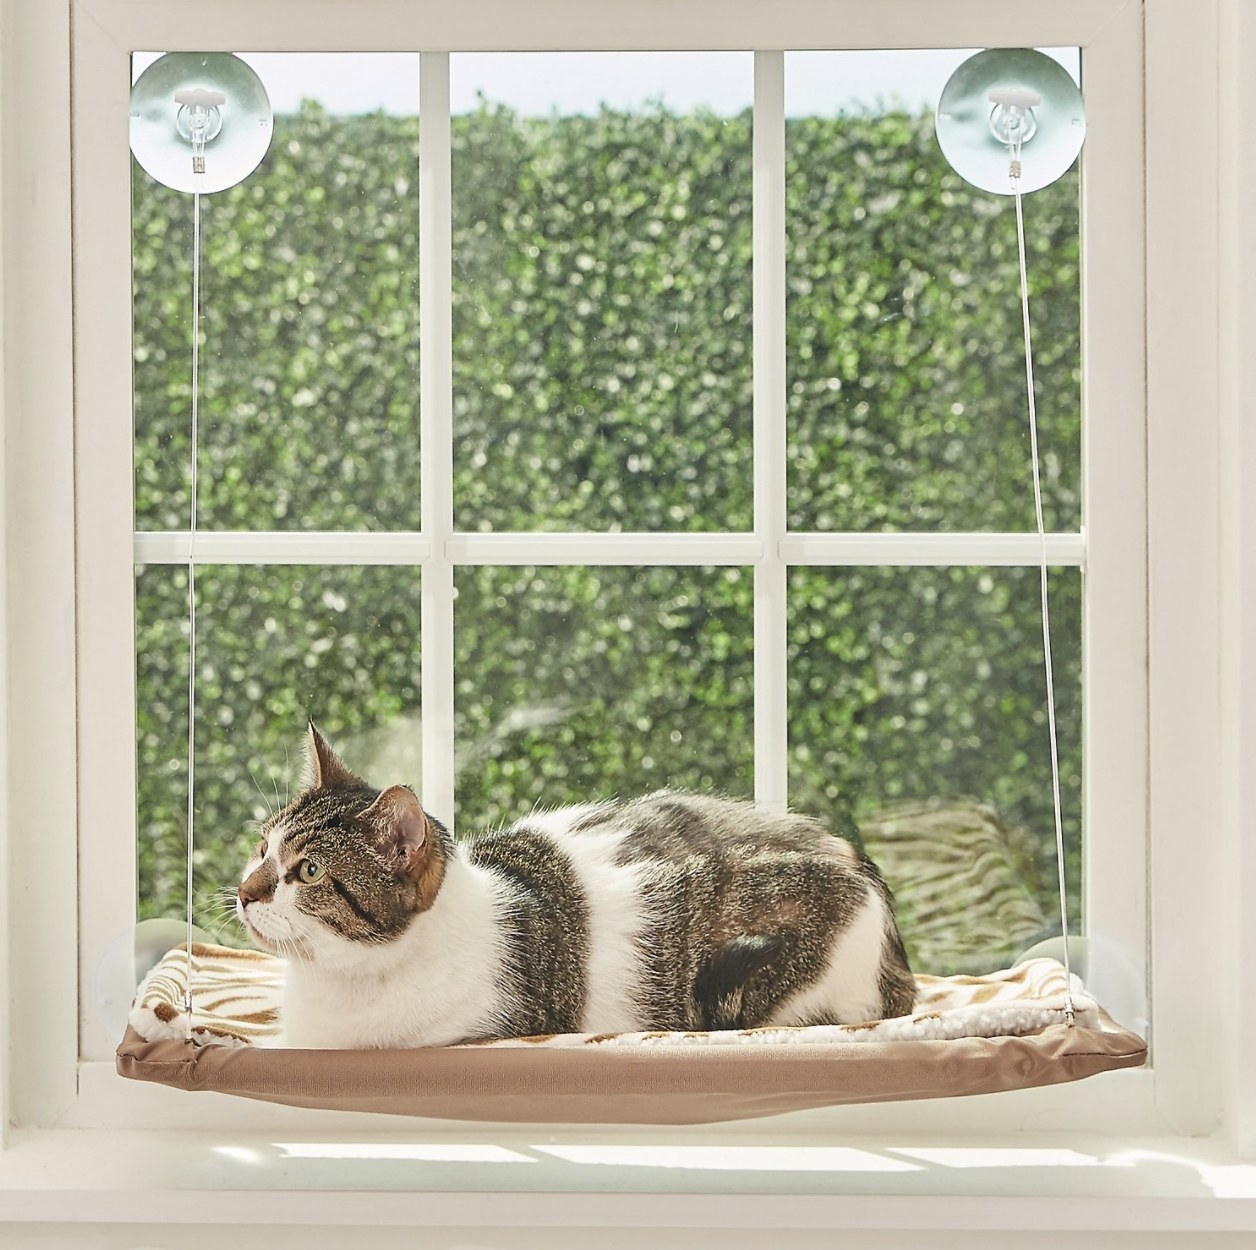 A multicolored cat is laying in the tan hammock with two large suction cups at the top of the window